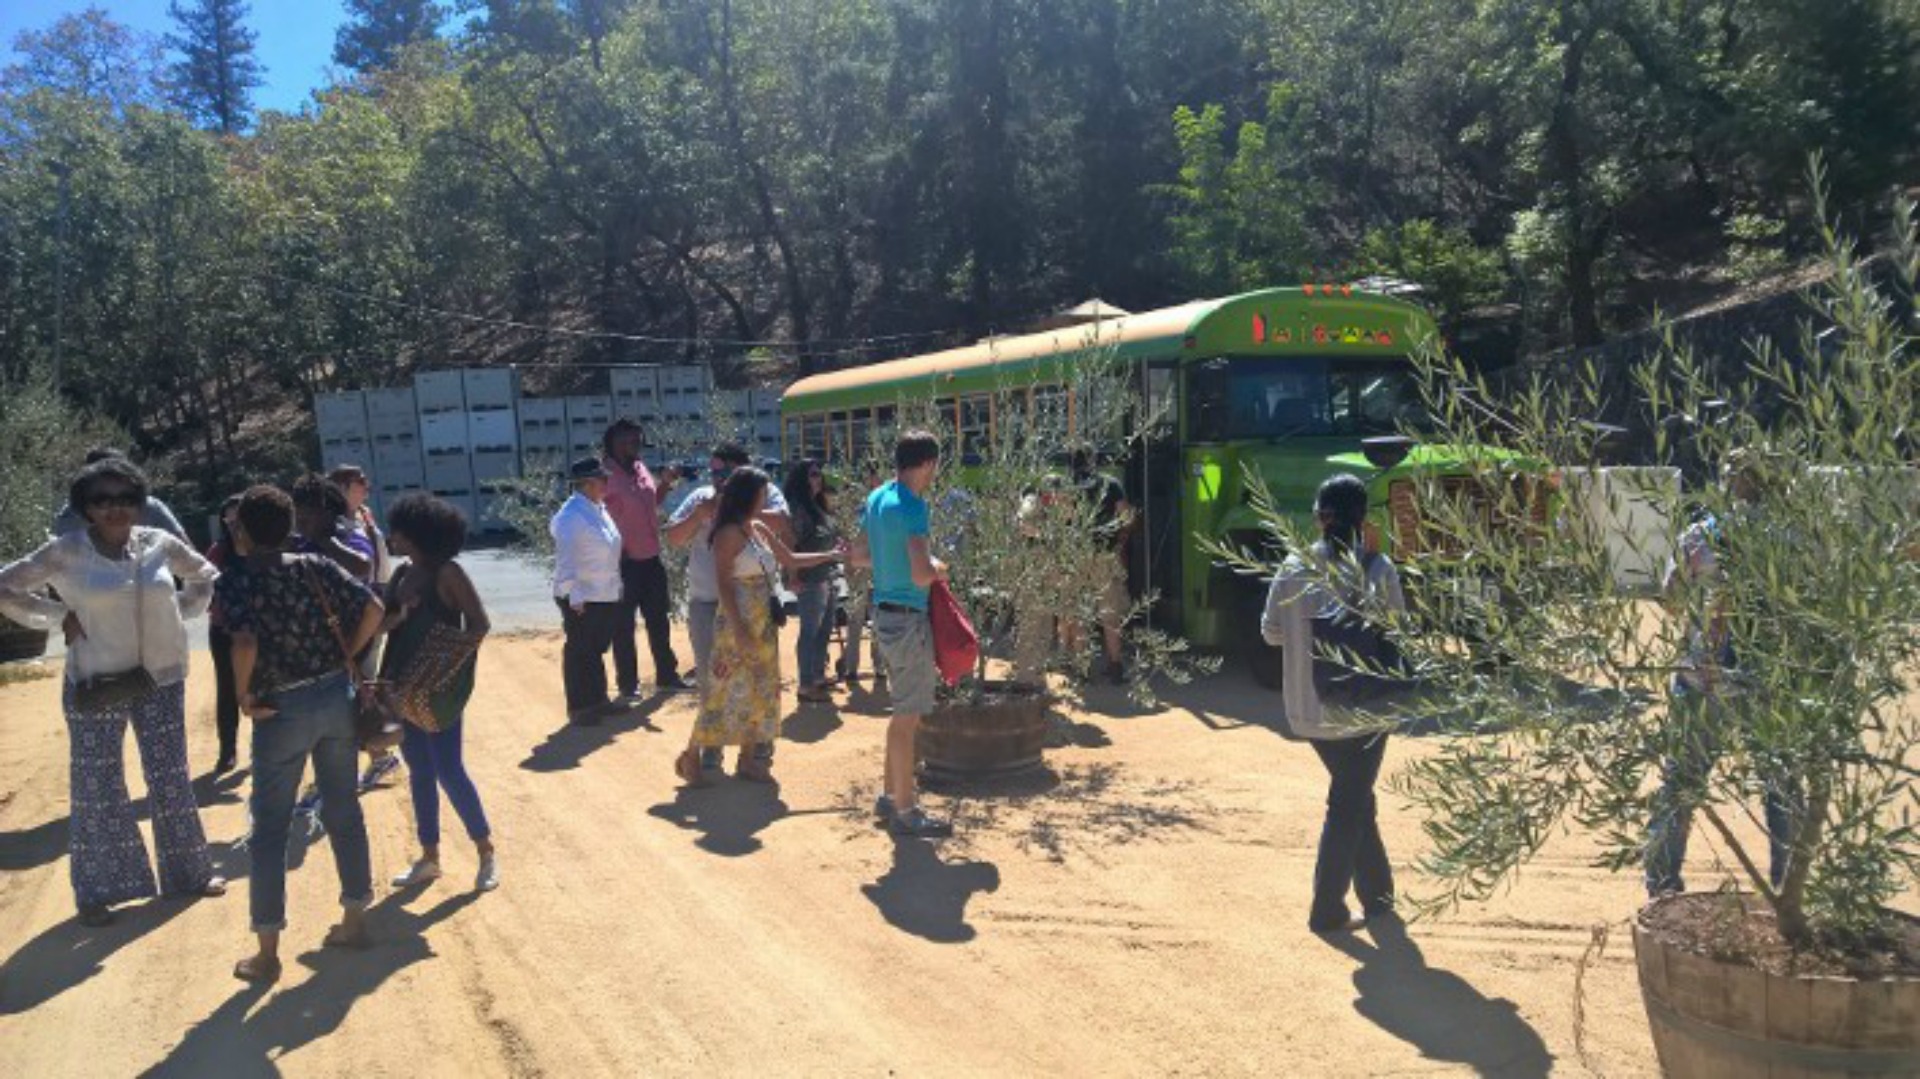 Attendees board the "Wine Soul Train" (aka the Mexican Bus) at the Council's recent event